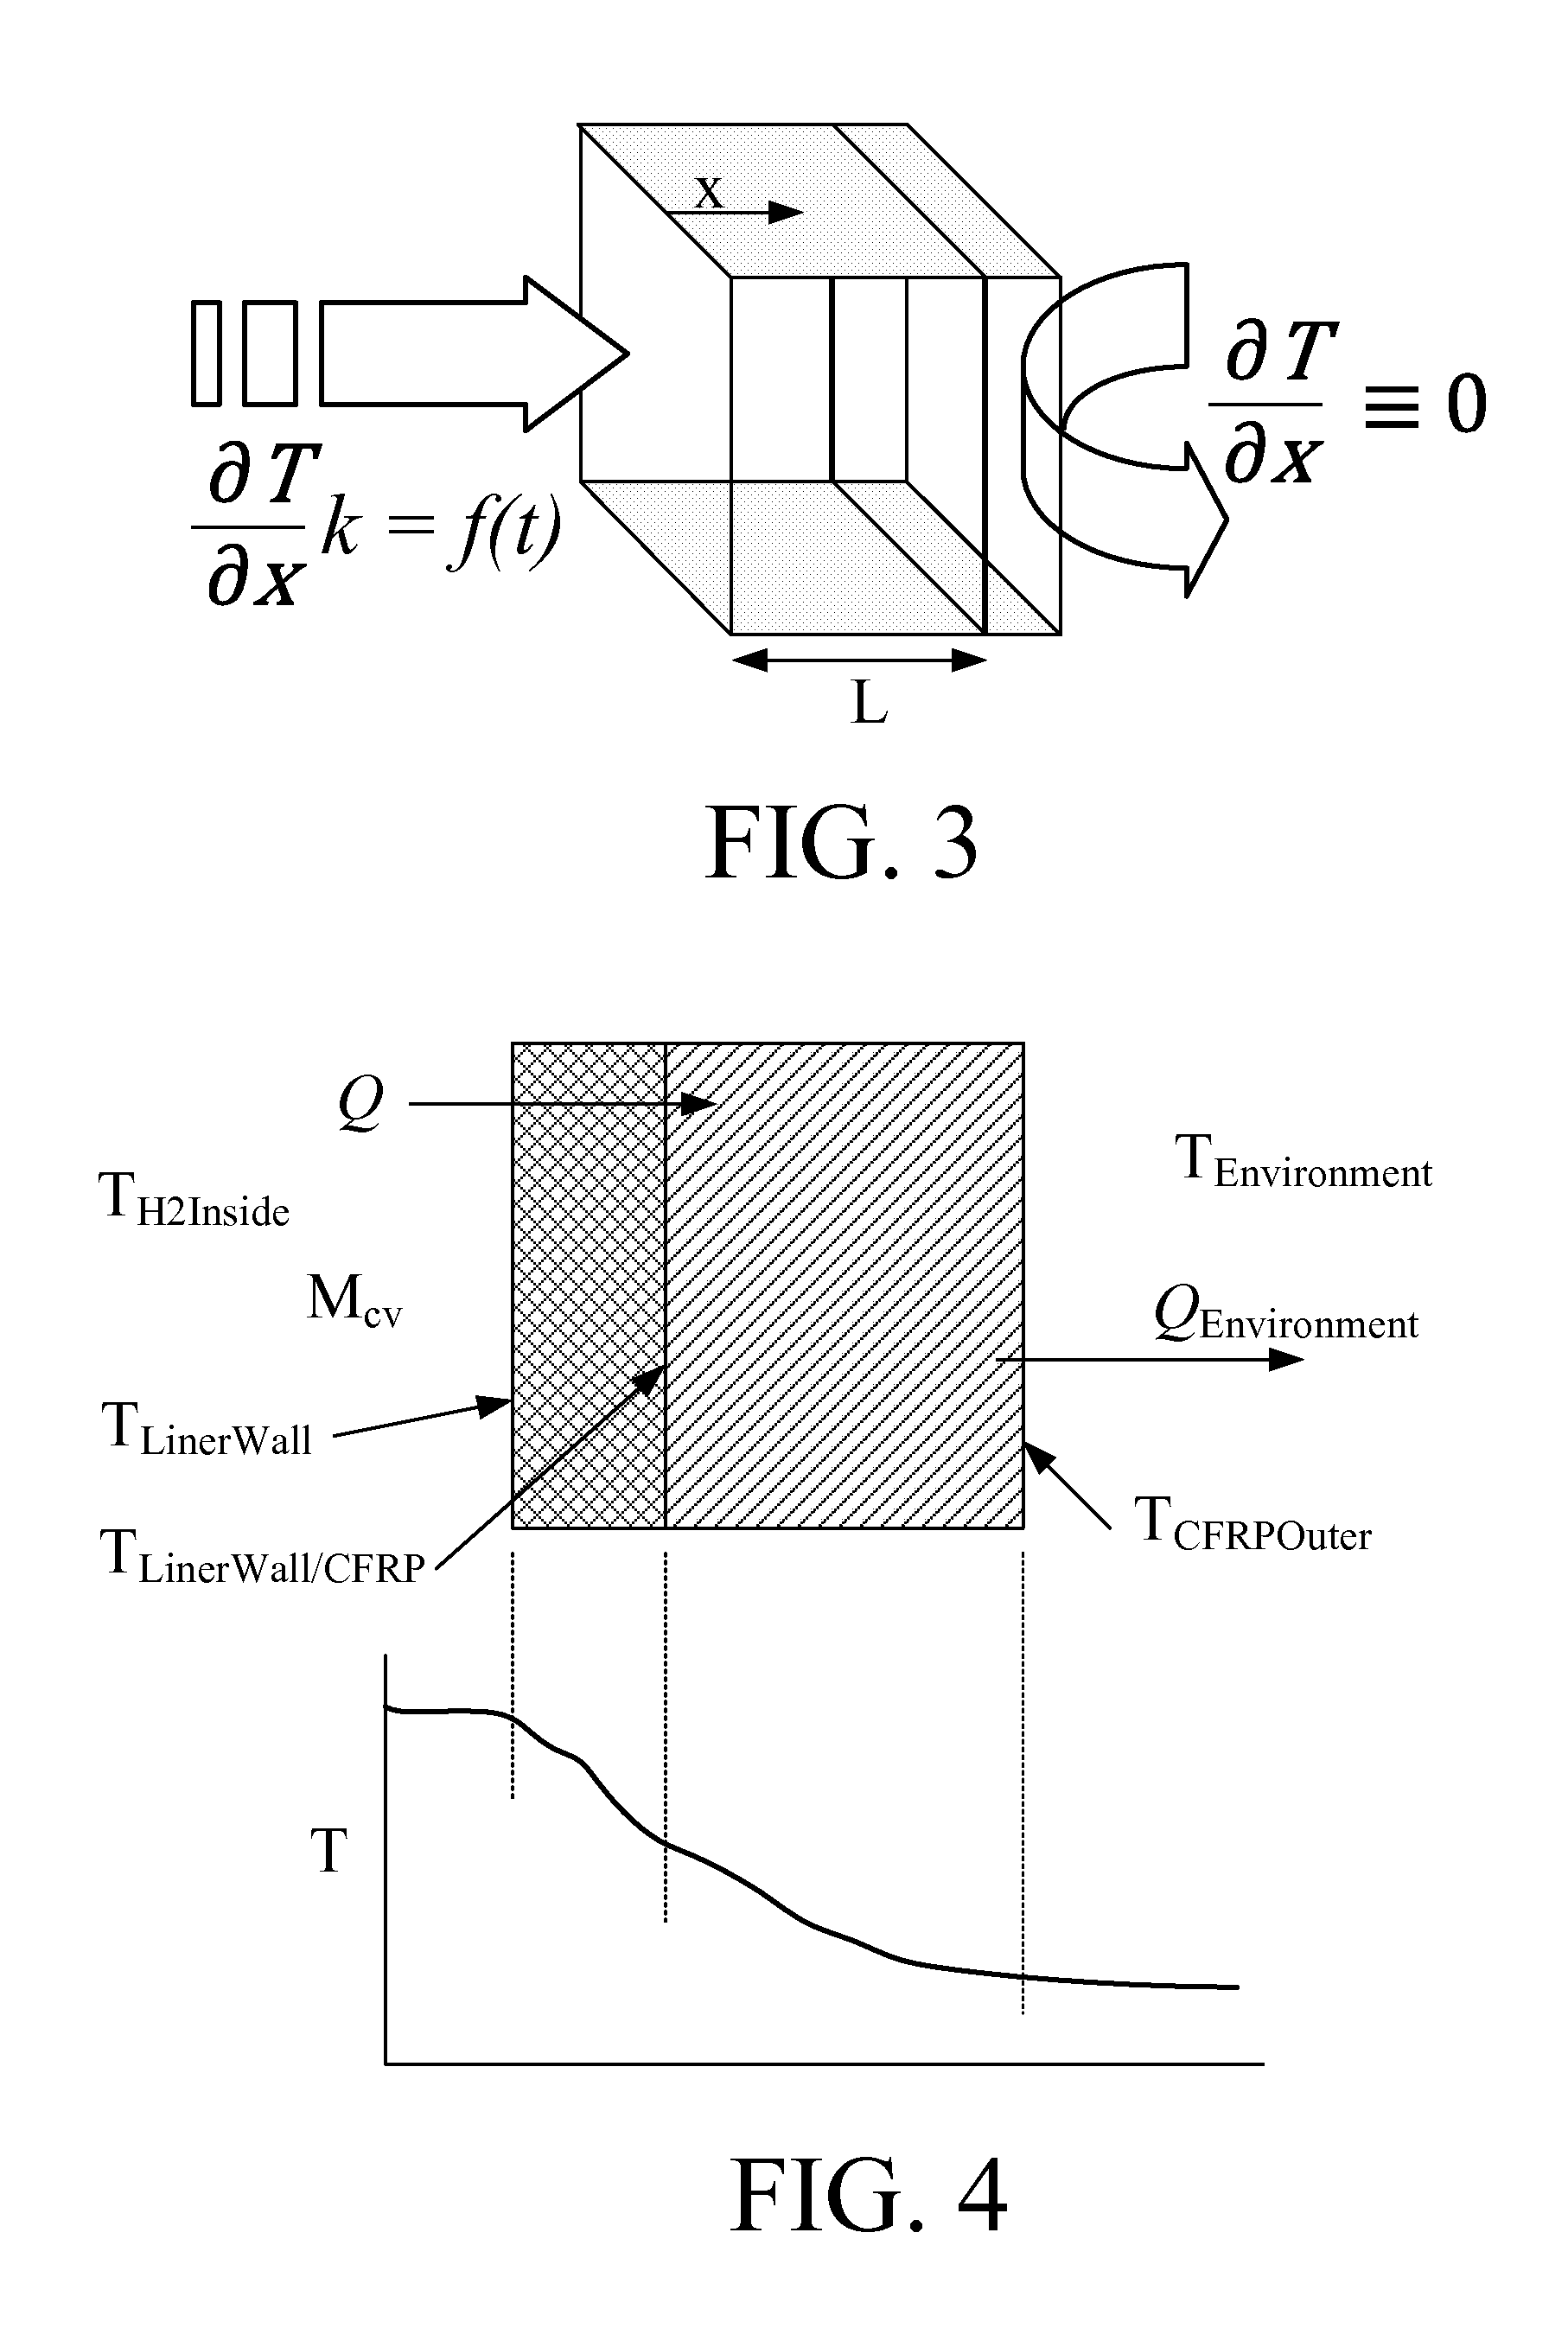 Method and System for Tank Refilling